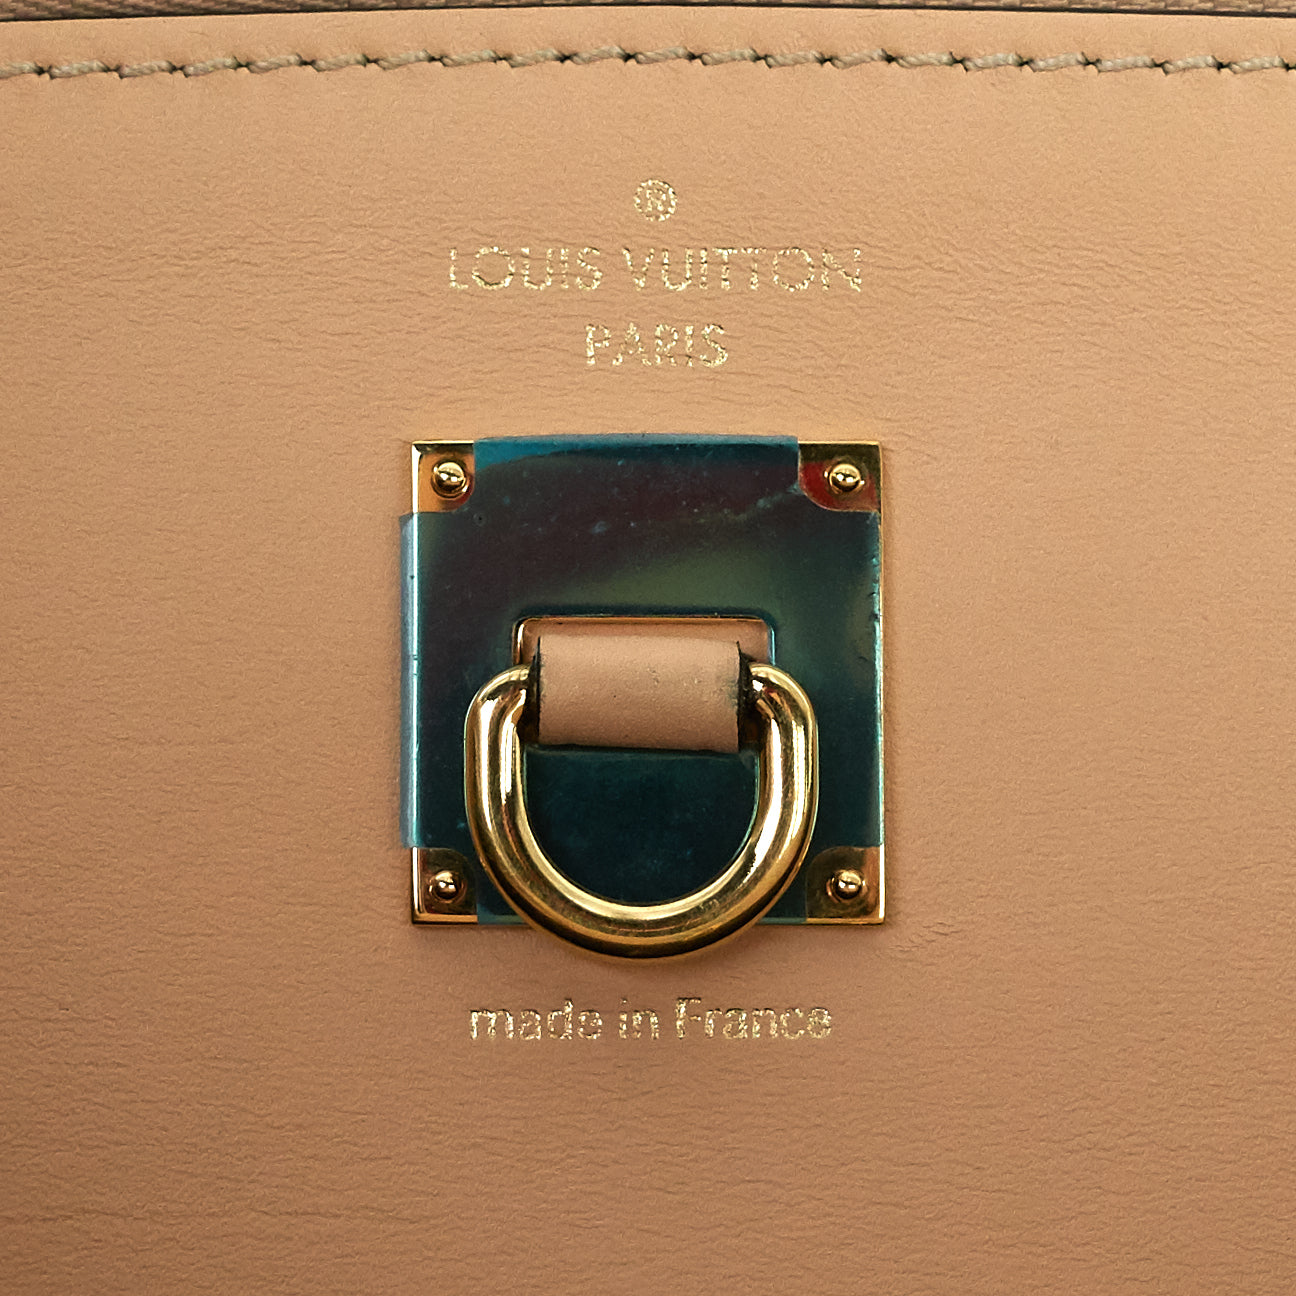 LOUIS VUITTON, totebag City Steamer MM Cruise collection 2016. - Bukowskis